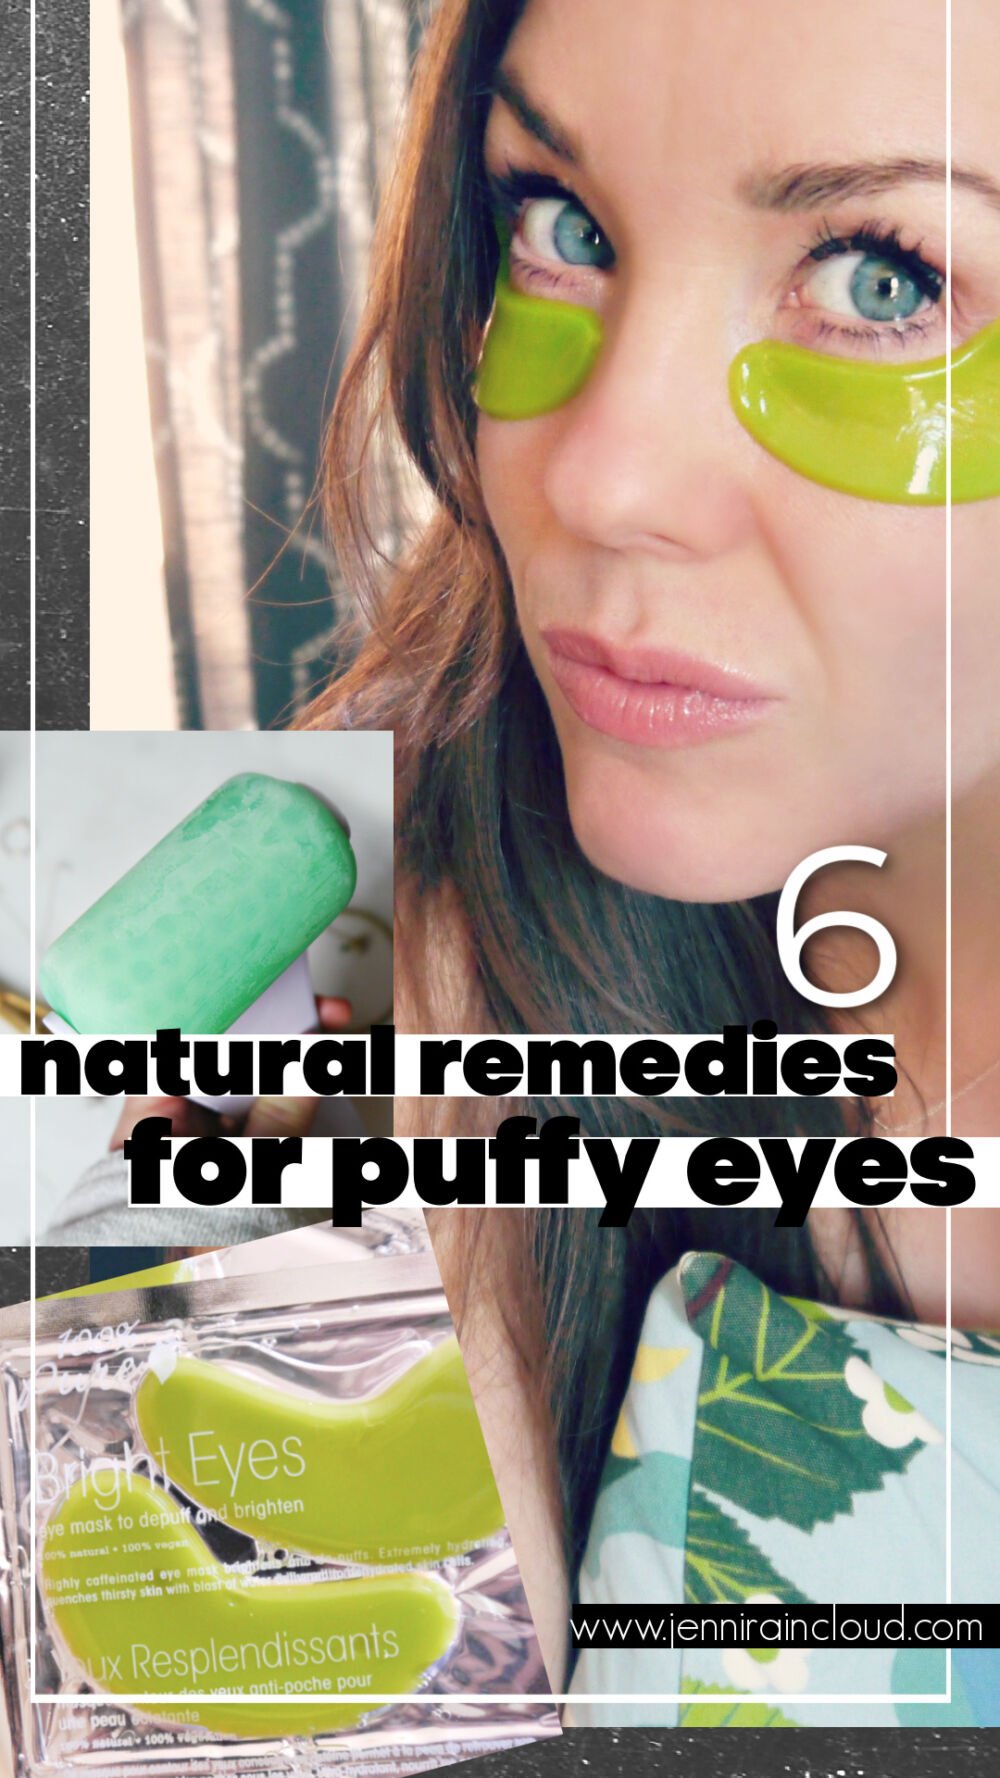 Natural Remedies for Puffy Eyes